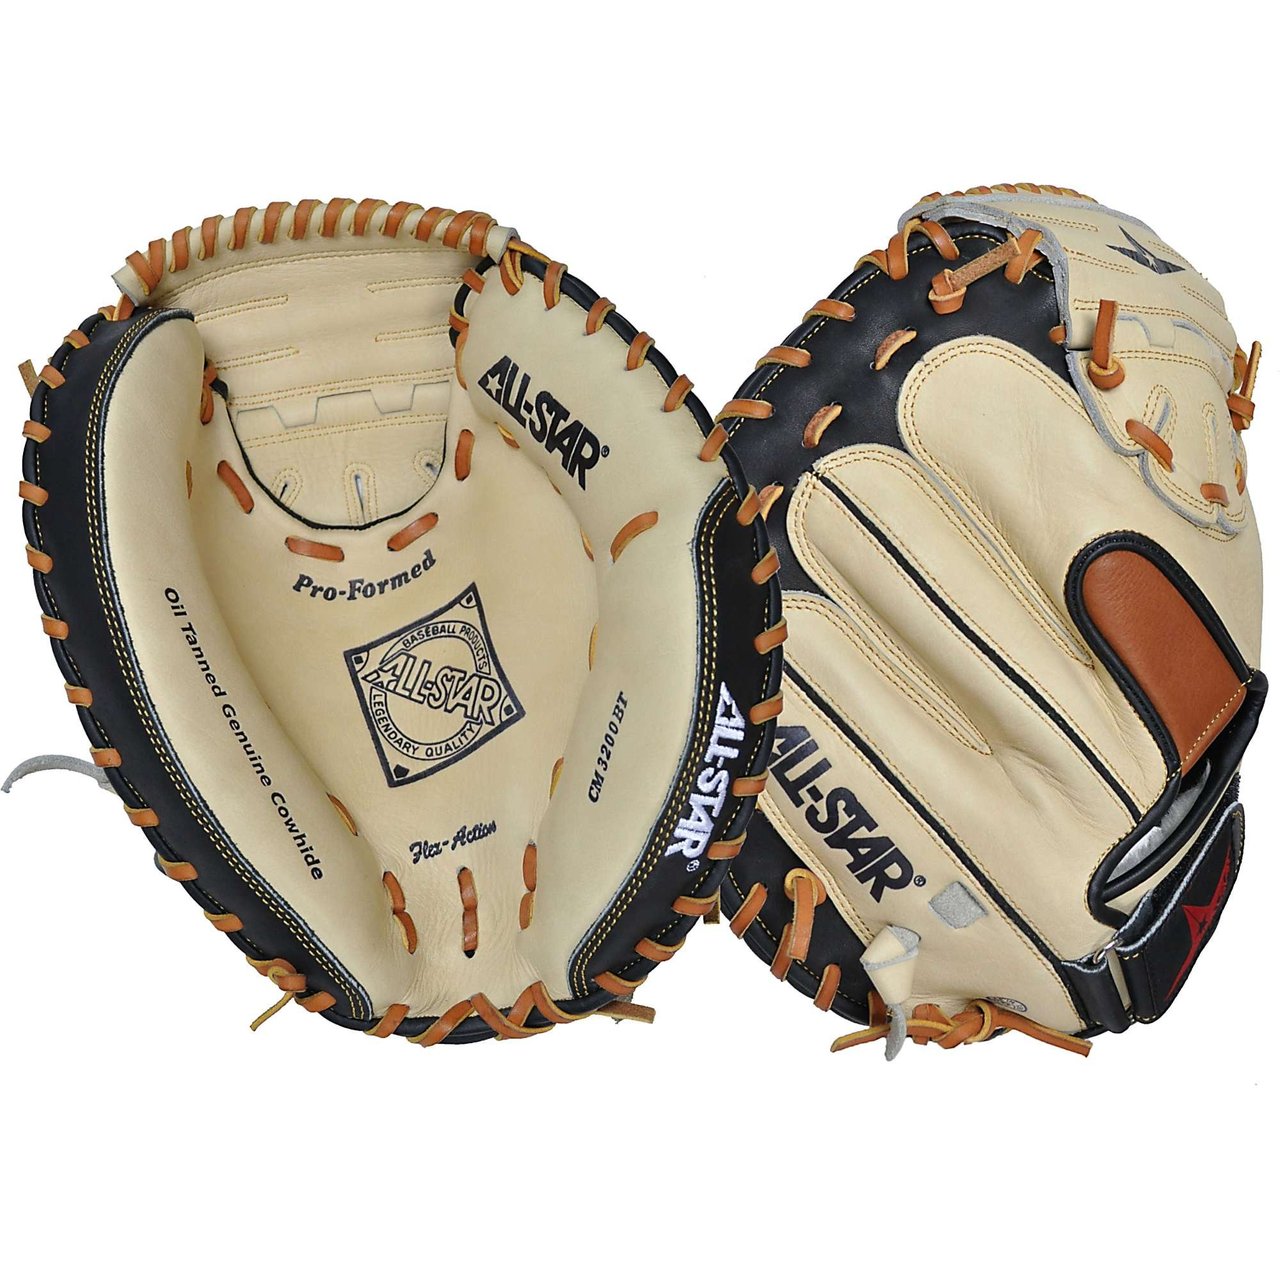 AllStar CM1200BT Youth Catchers Mitt 31.5 inch (Left Hand Throw) : The All Star CM1200BT features Oil Tanned Genuine Cowhide, Flex-Action heel, and a Pro Formed pocket.. All Star CM1200SBT Youth Catcher's Mitt Features. Oil Tanned Genuine Cowhide. Flex-Action Heel Pro Formed Pocket.